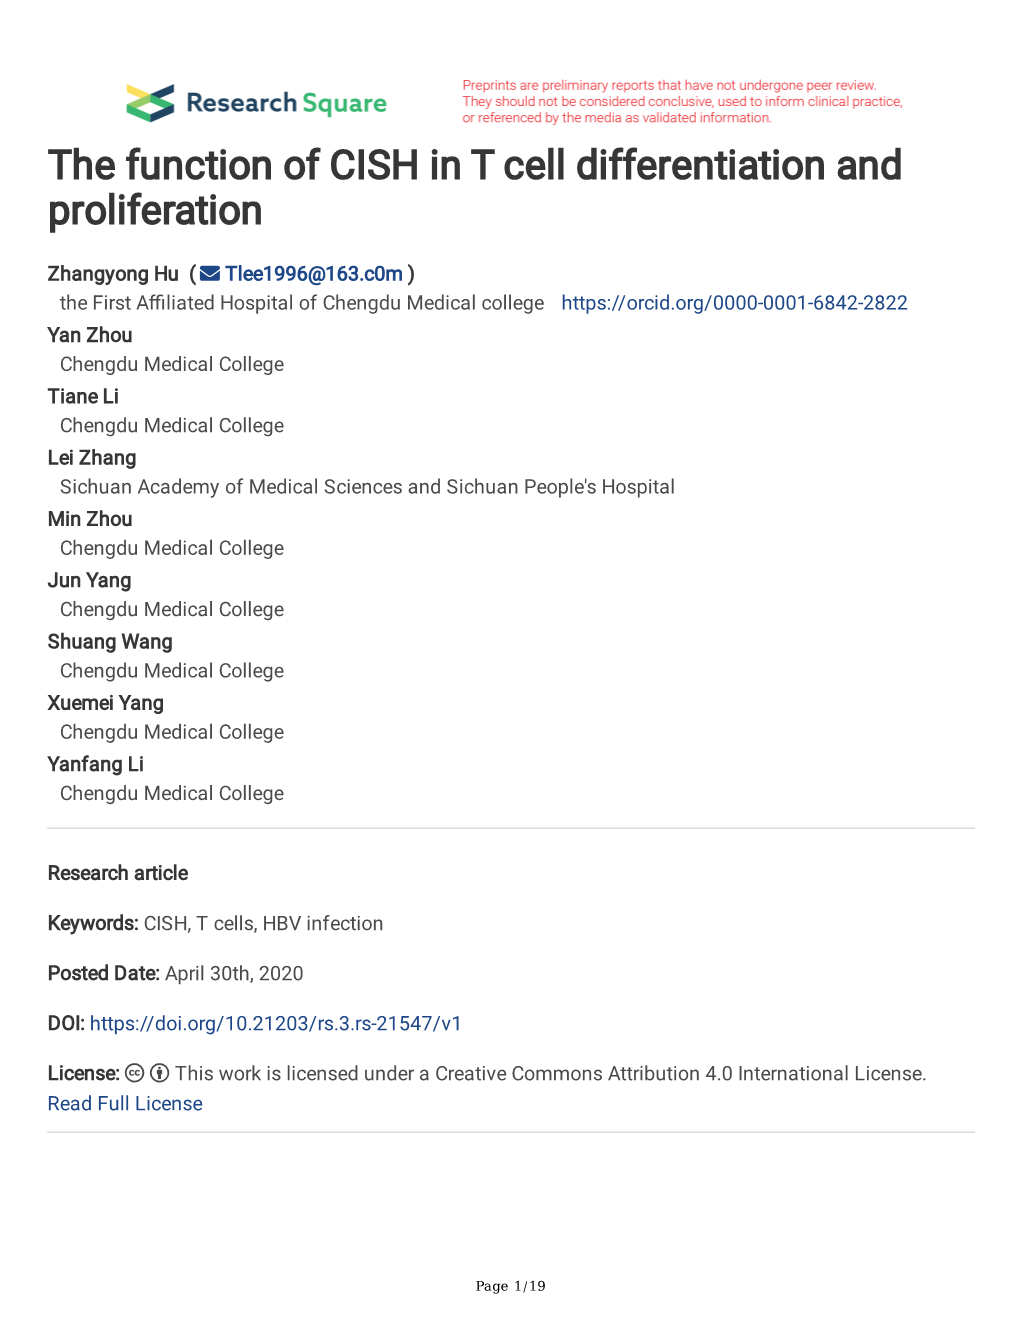 The Function of CISH in T Cell Differentiation and Proliferation